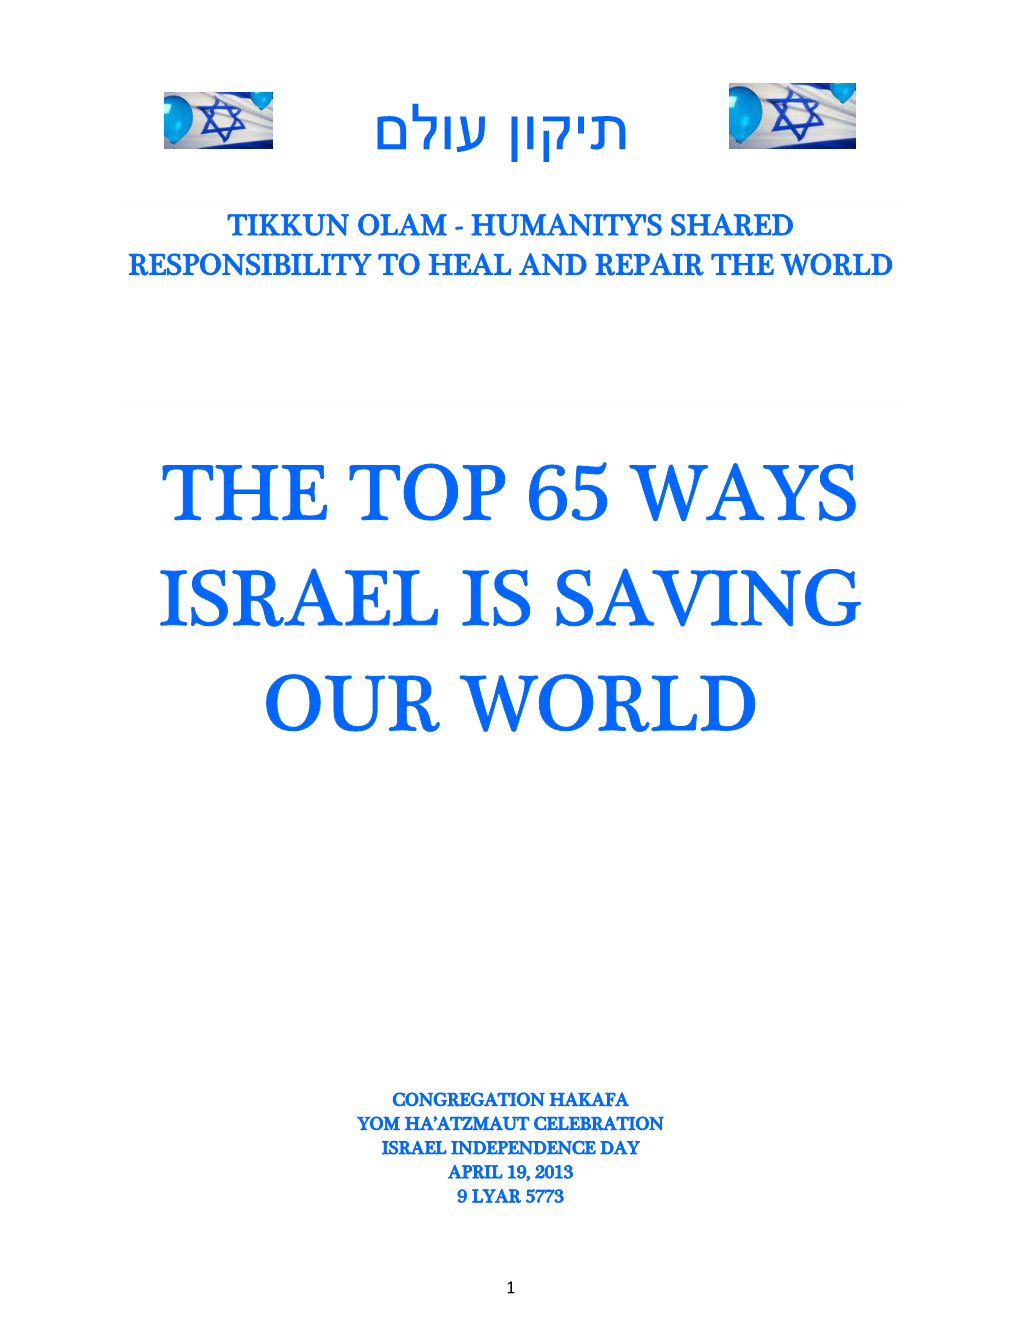 The Top 65 Ways Israel Is Saving Our World